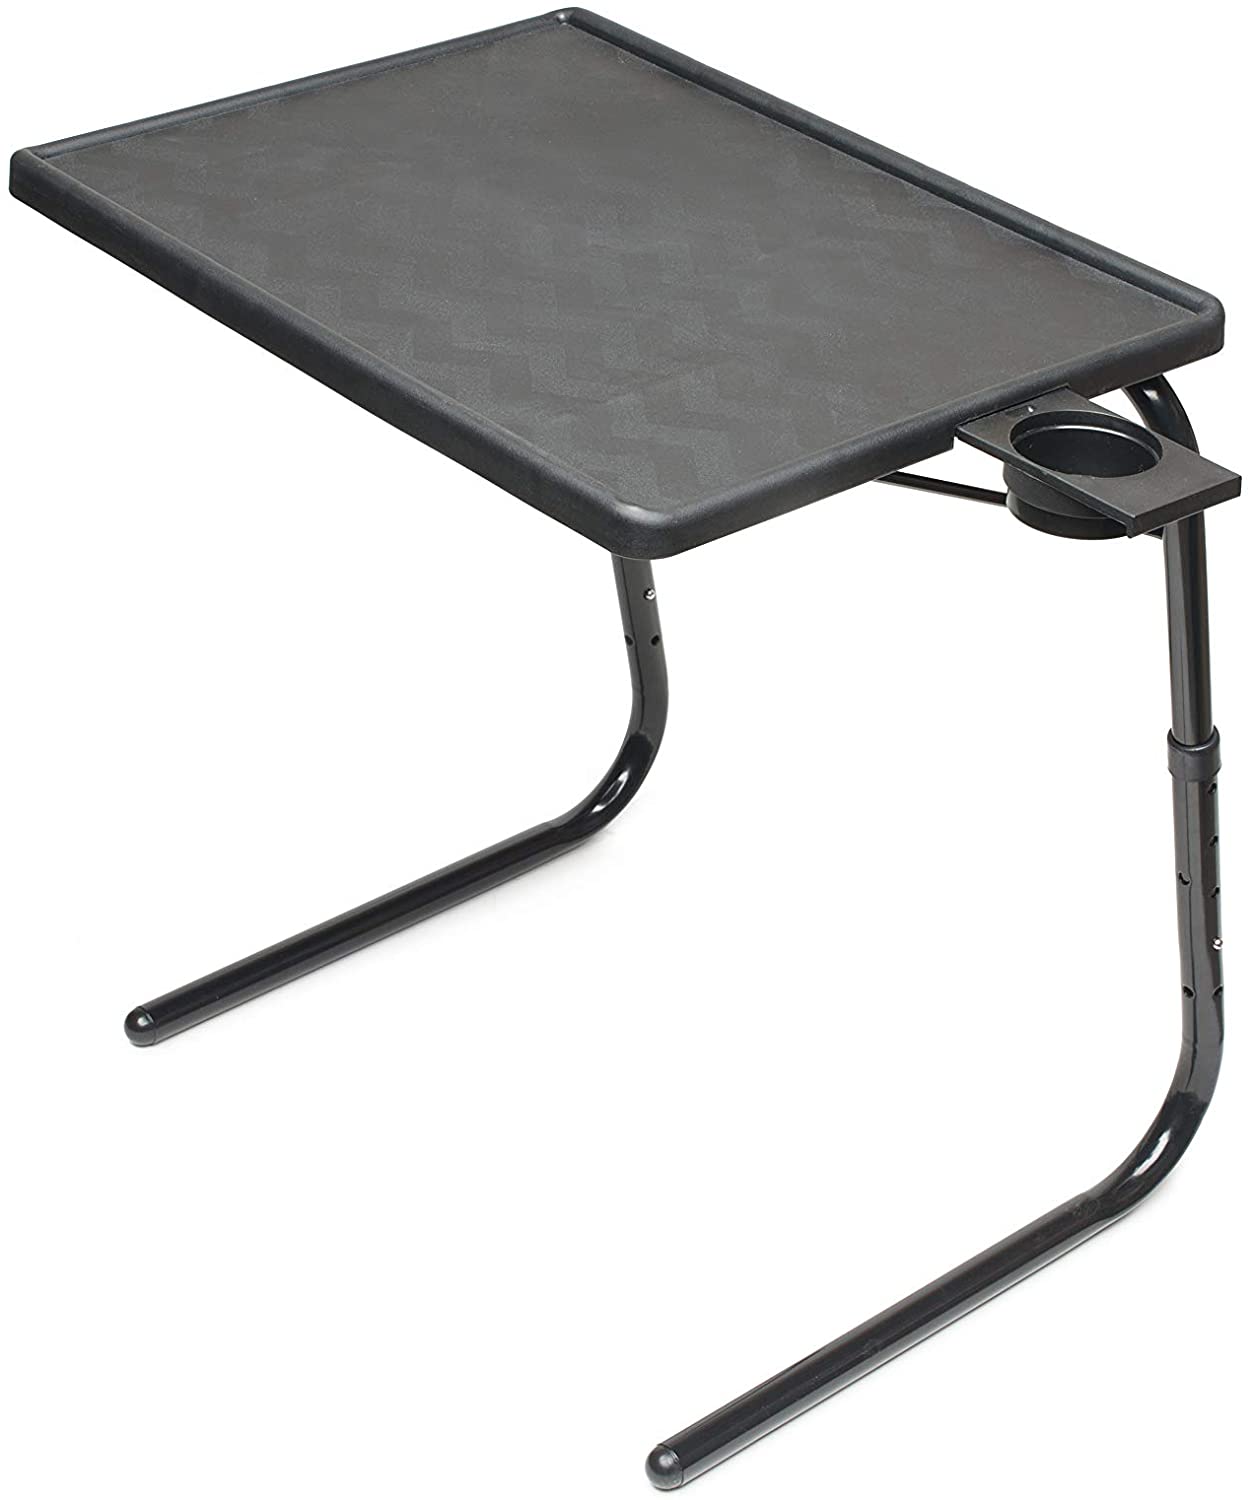 <strong>3. Table Mate II Folding TV Tray Table</strong>